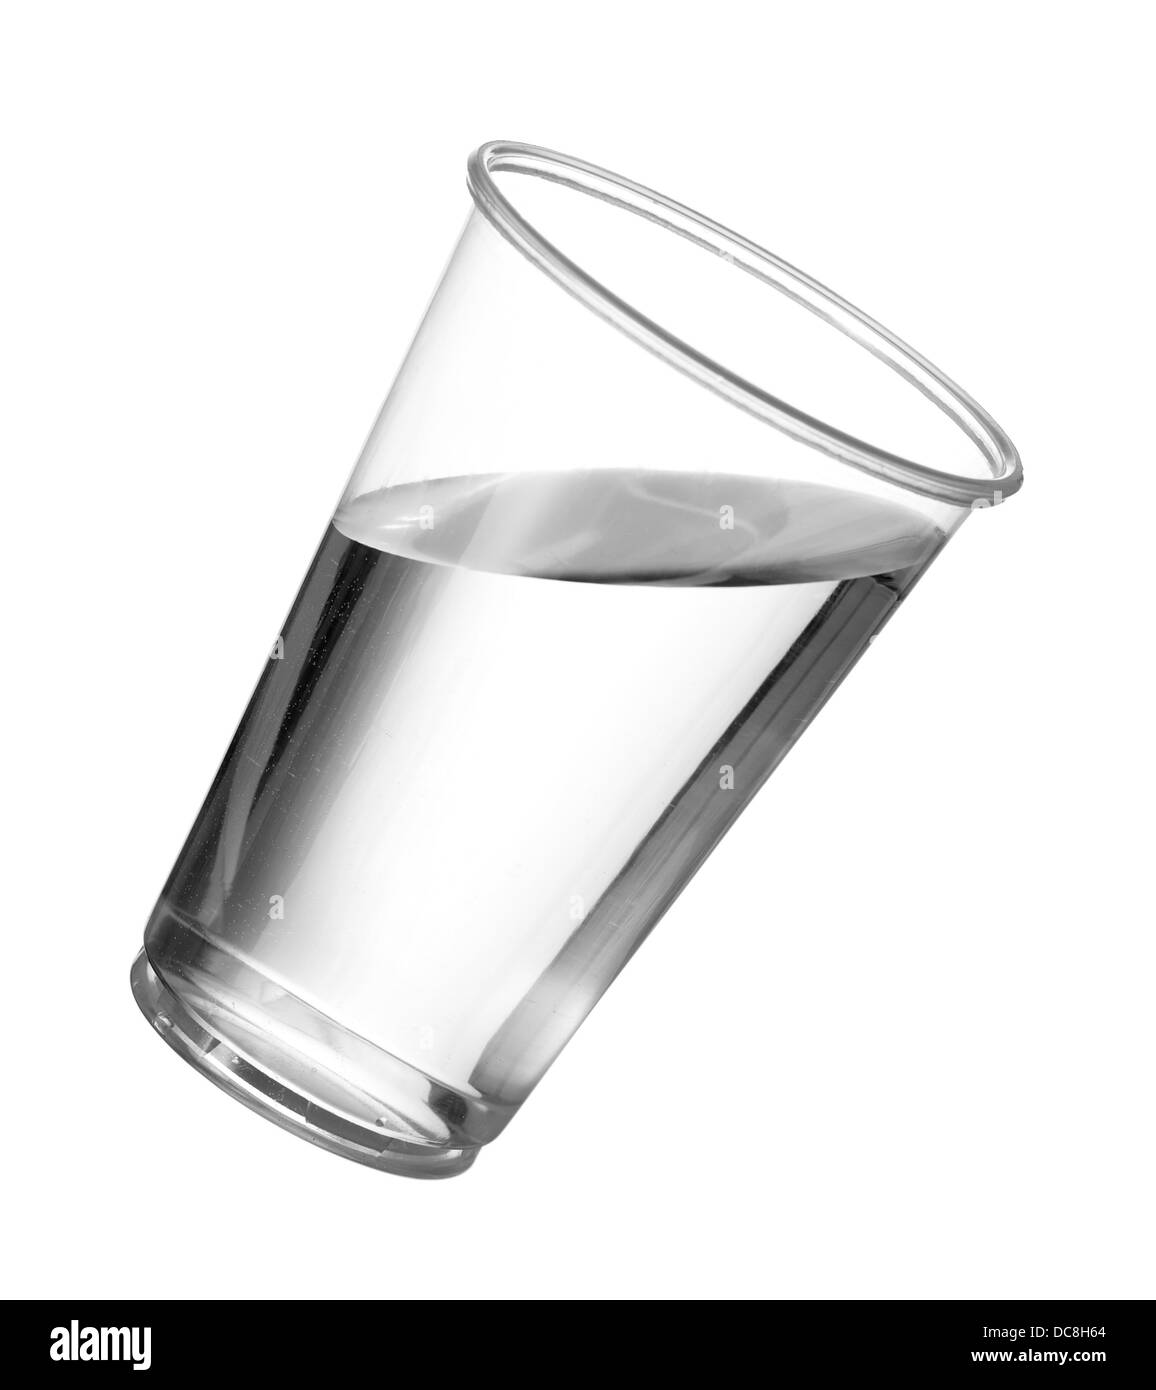 Glass of water in a plastic pint glass Stock Photo